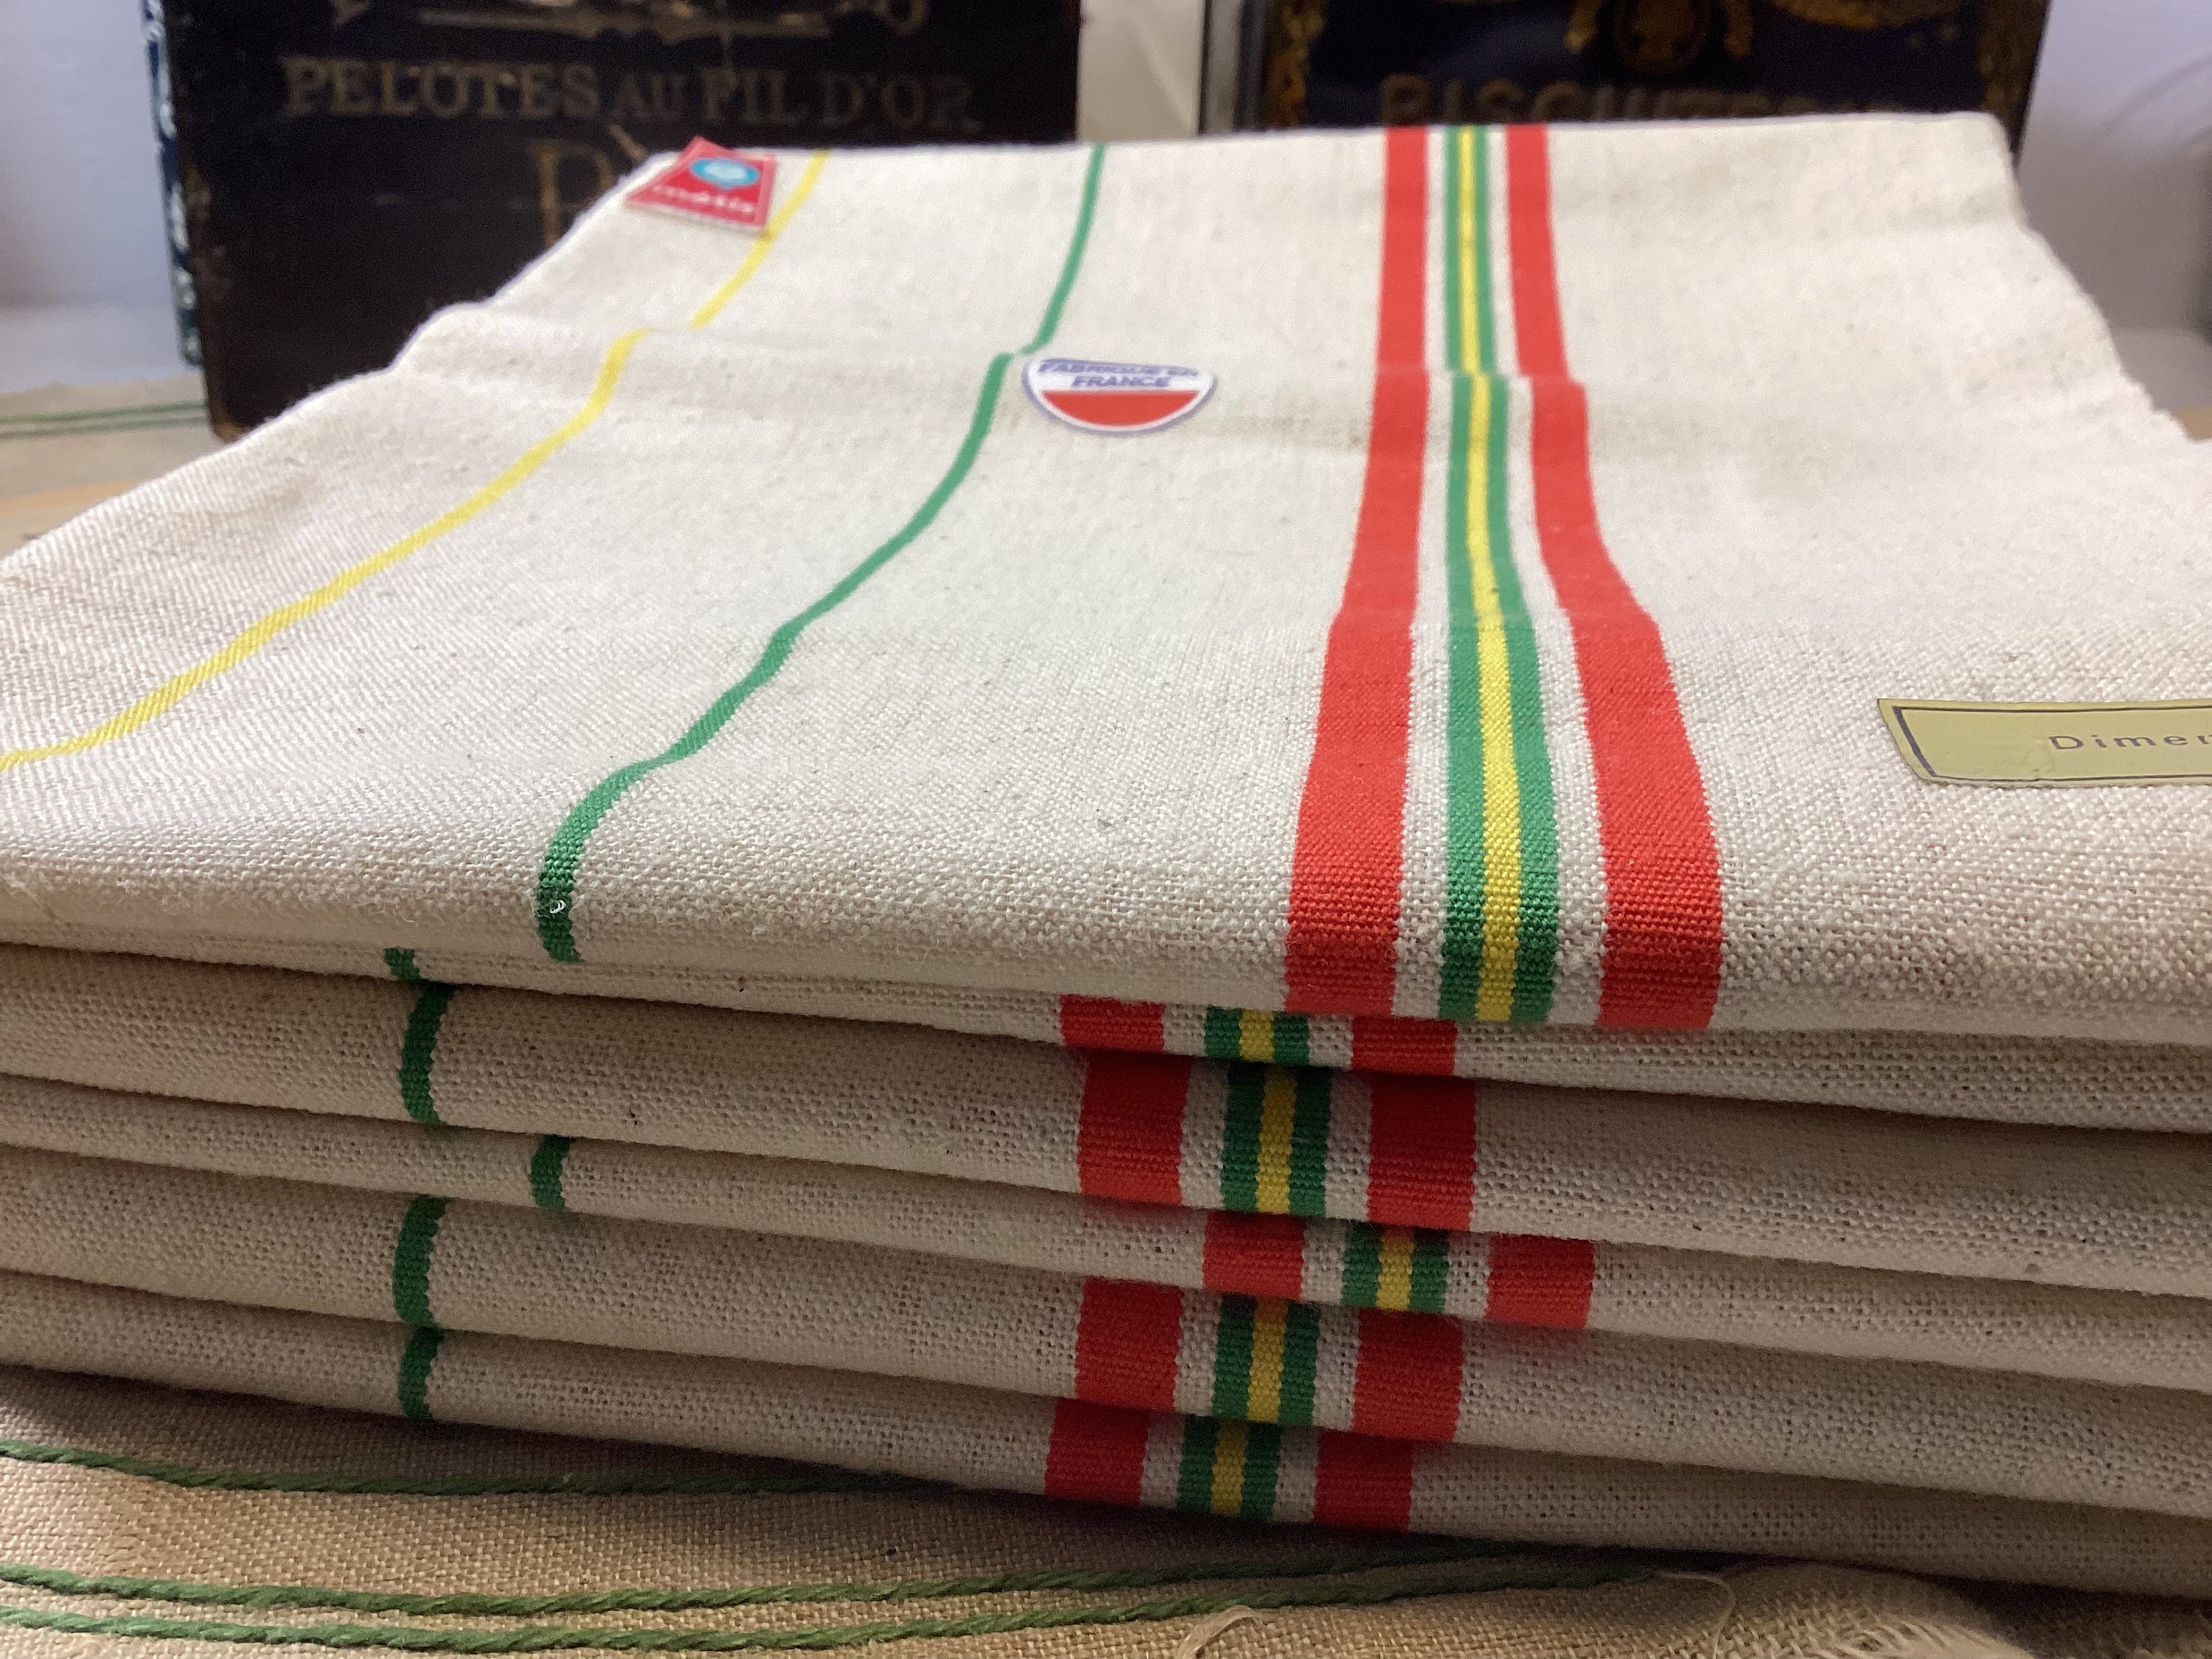 Handmade French Style Linen White With Red Striped Hand Tea Towel